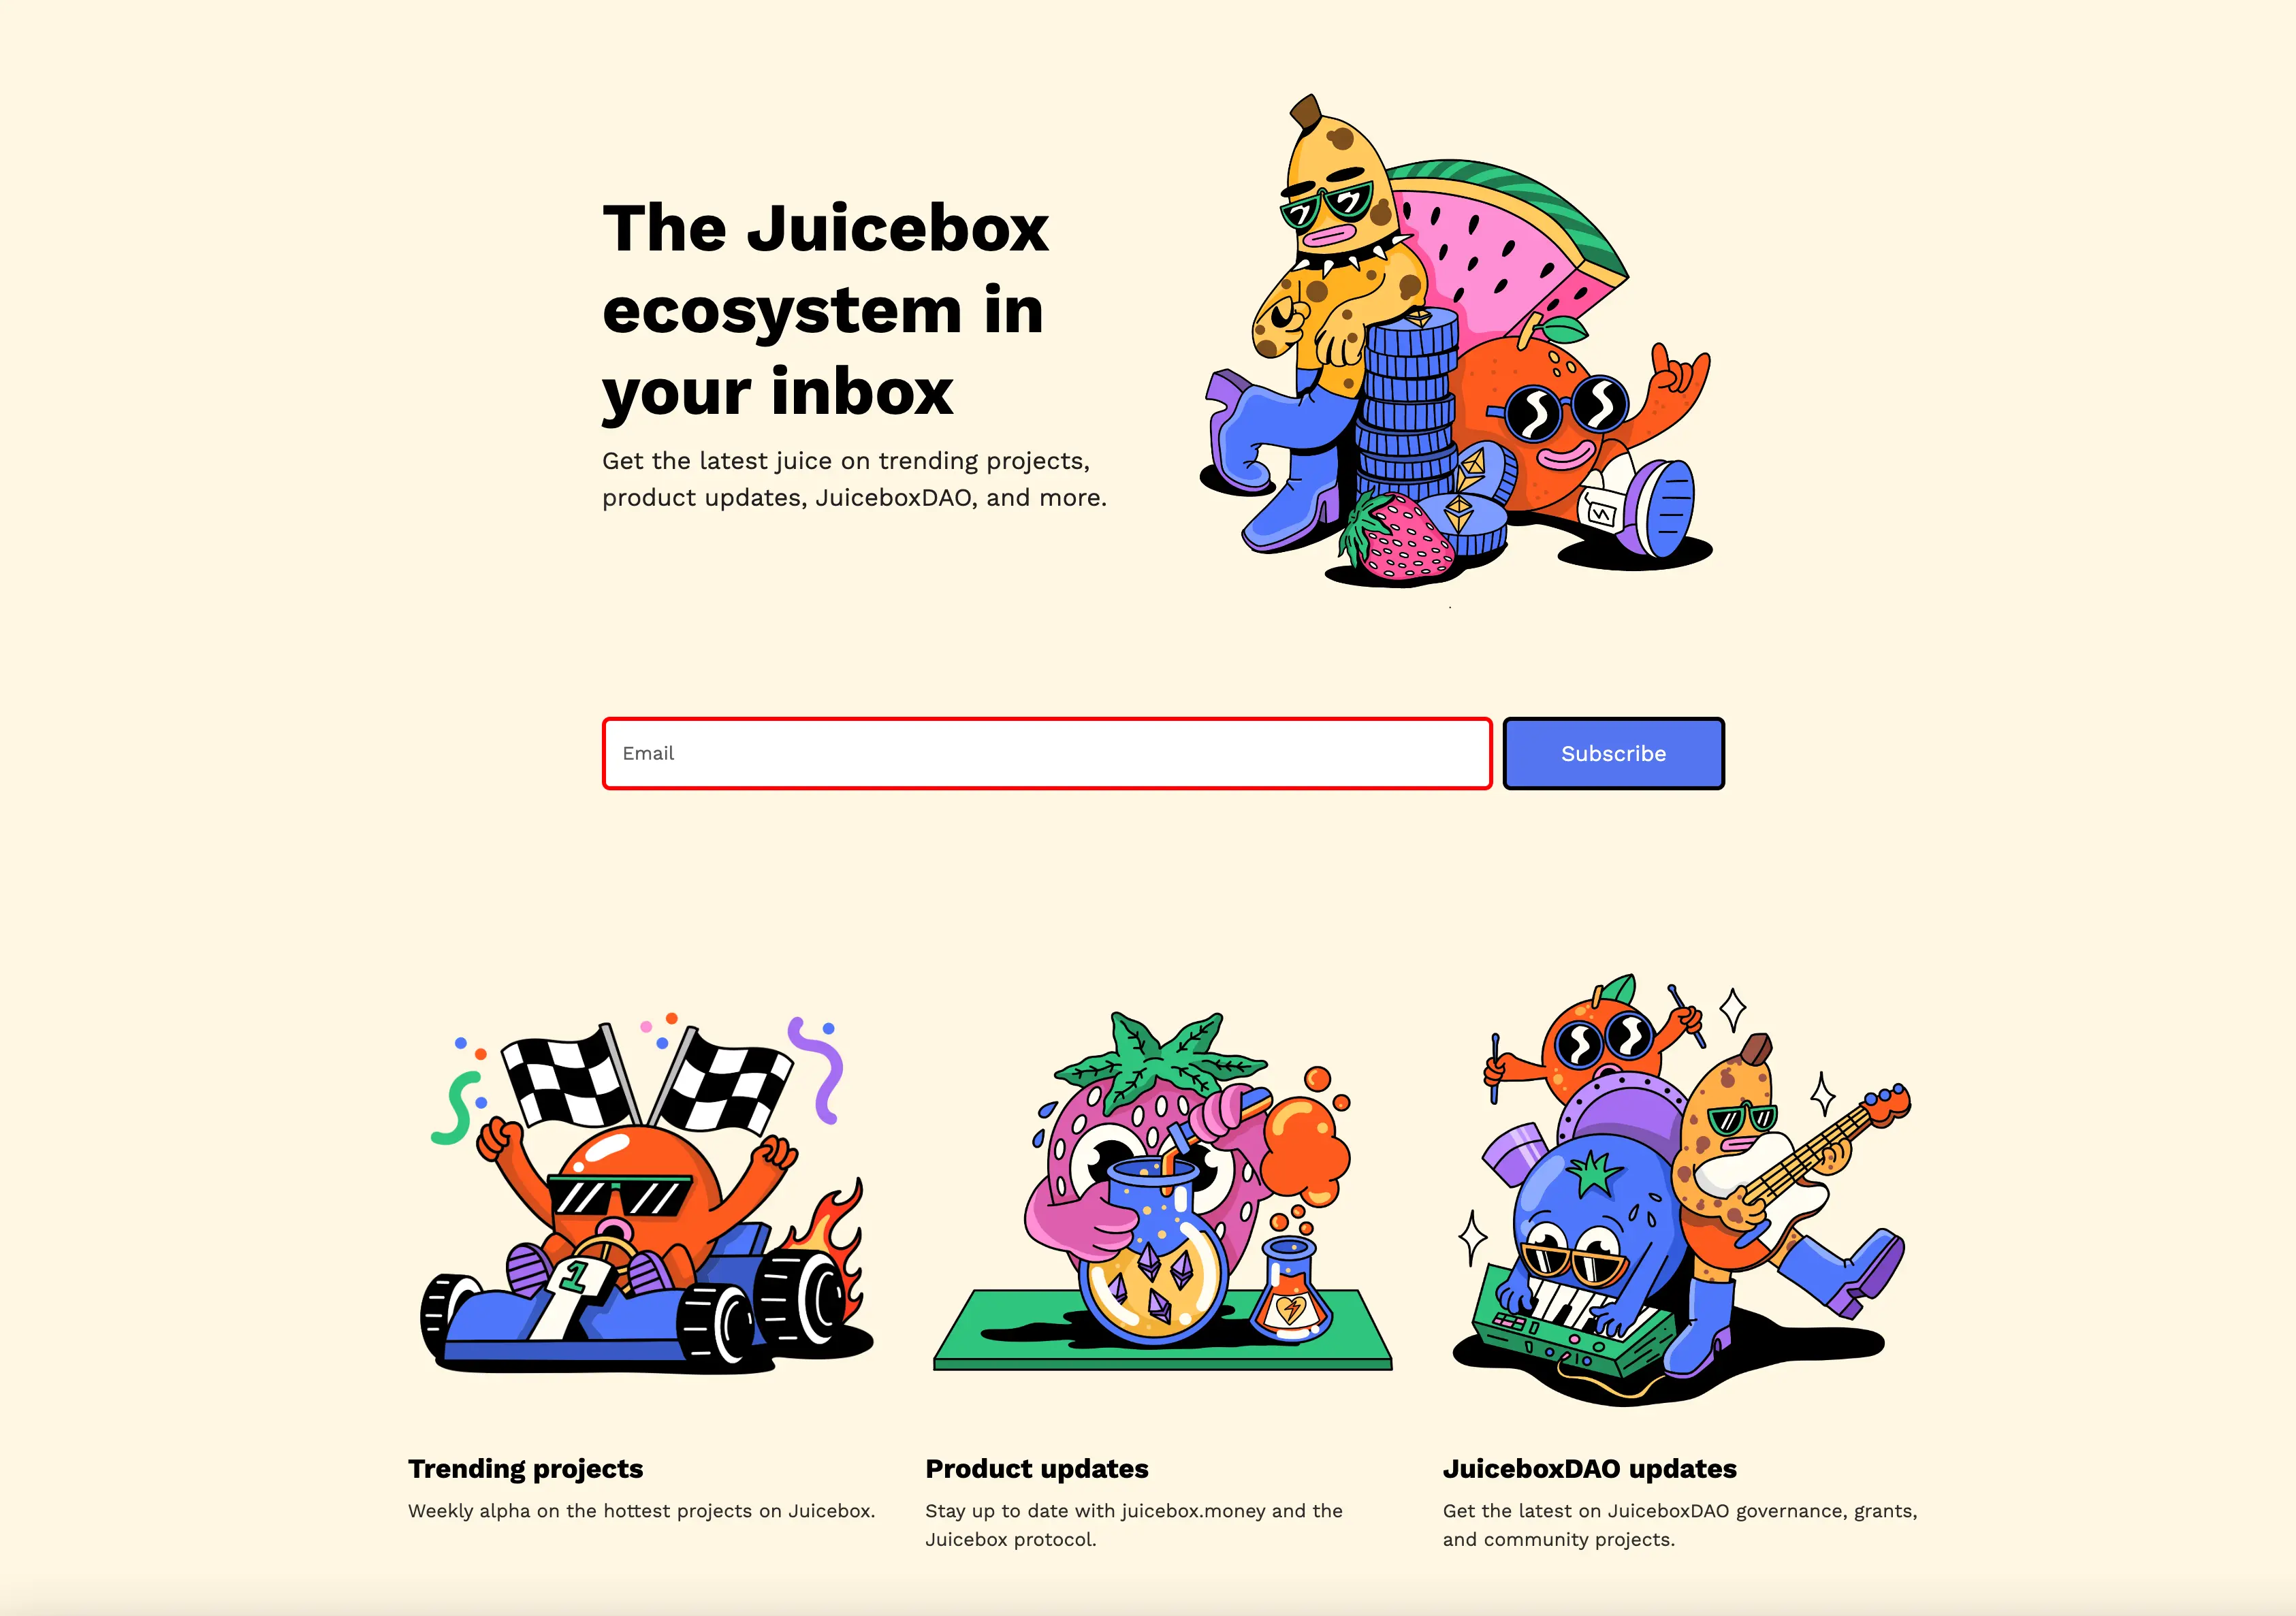 New landing page for Juicenews